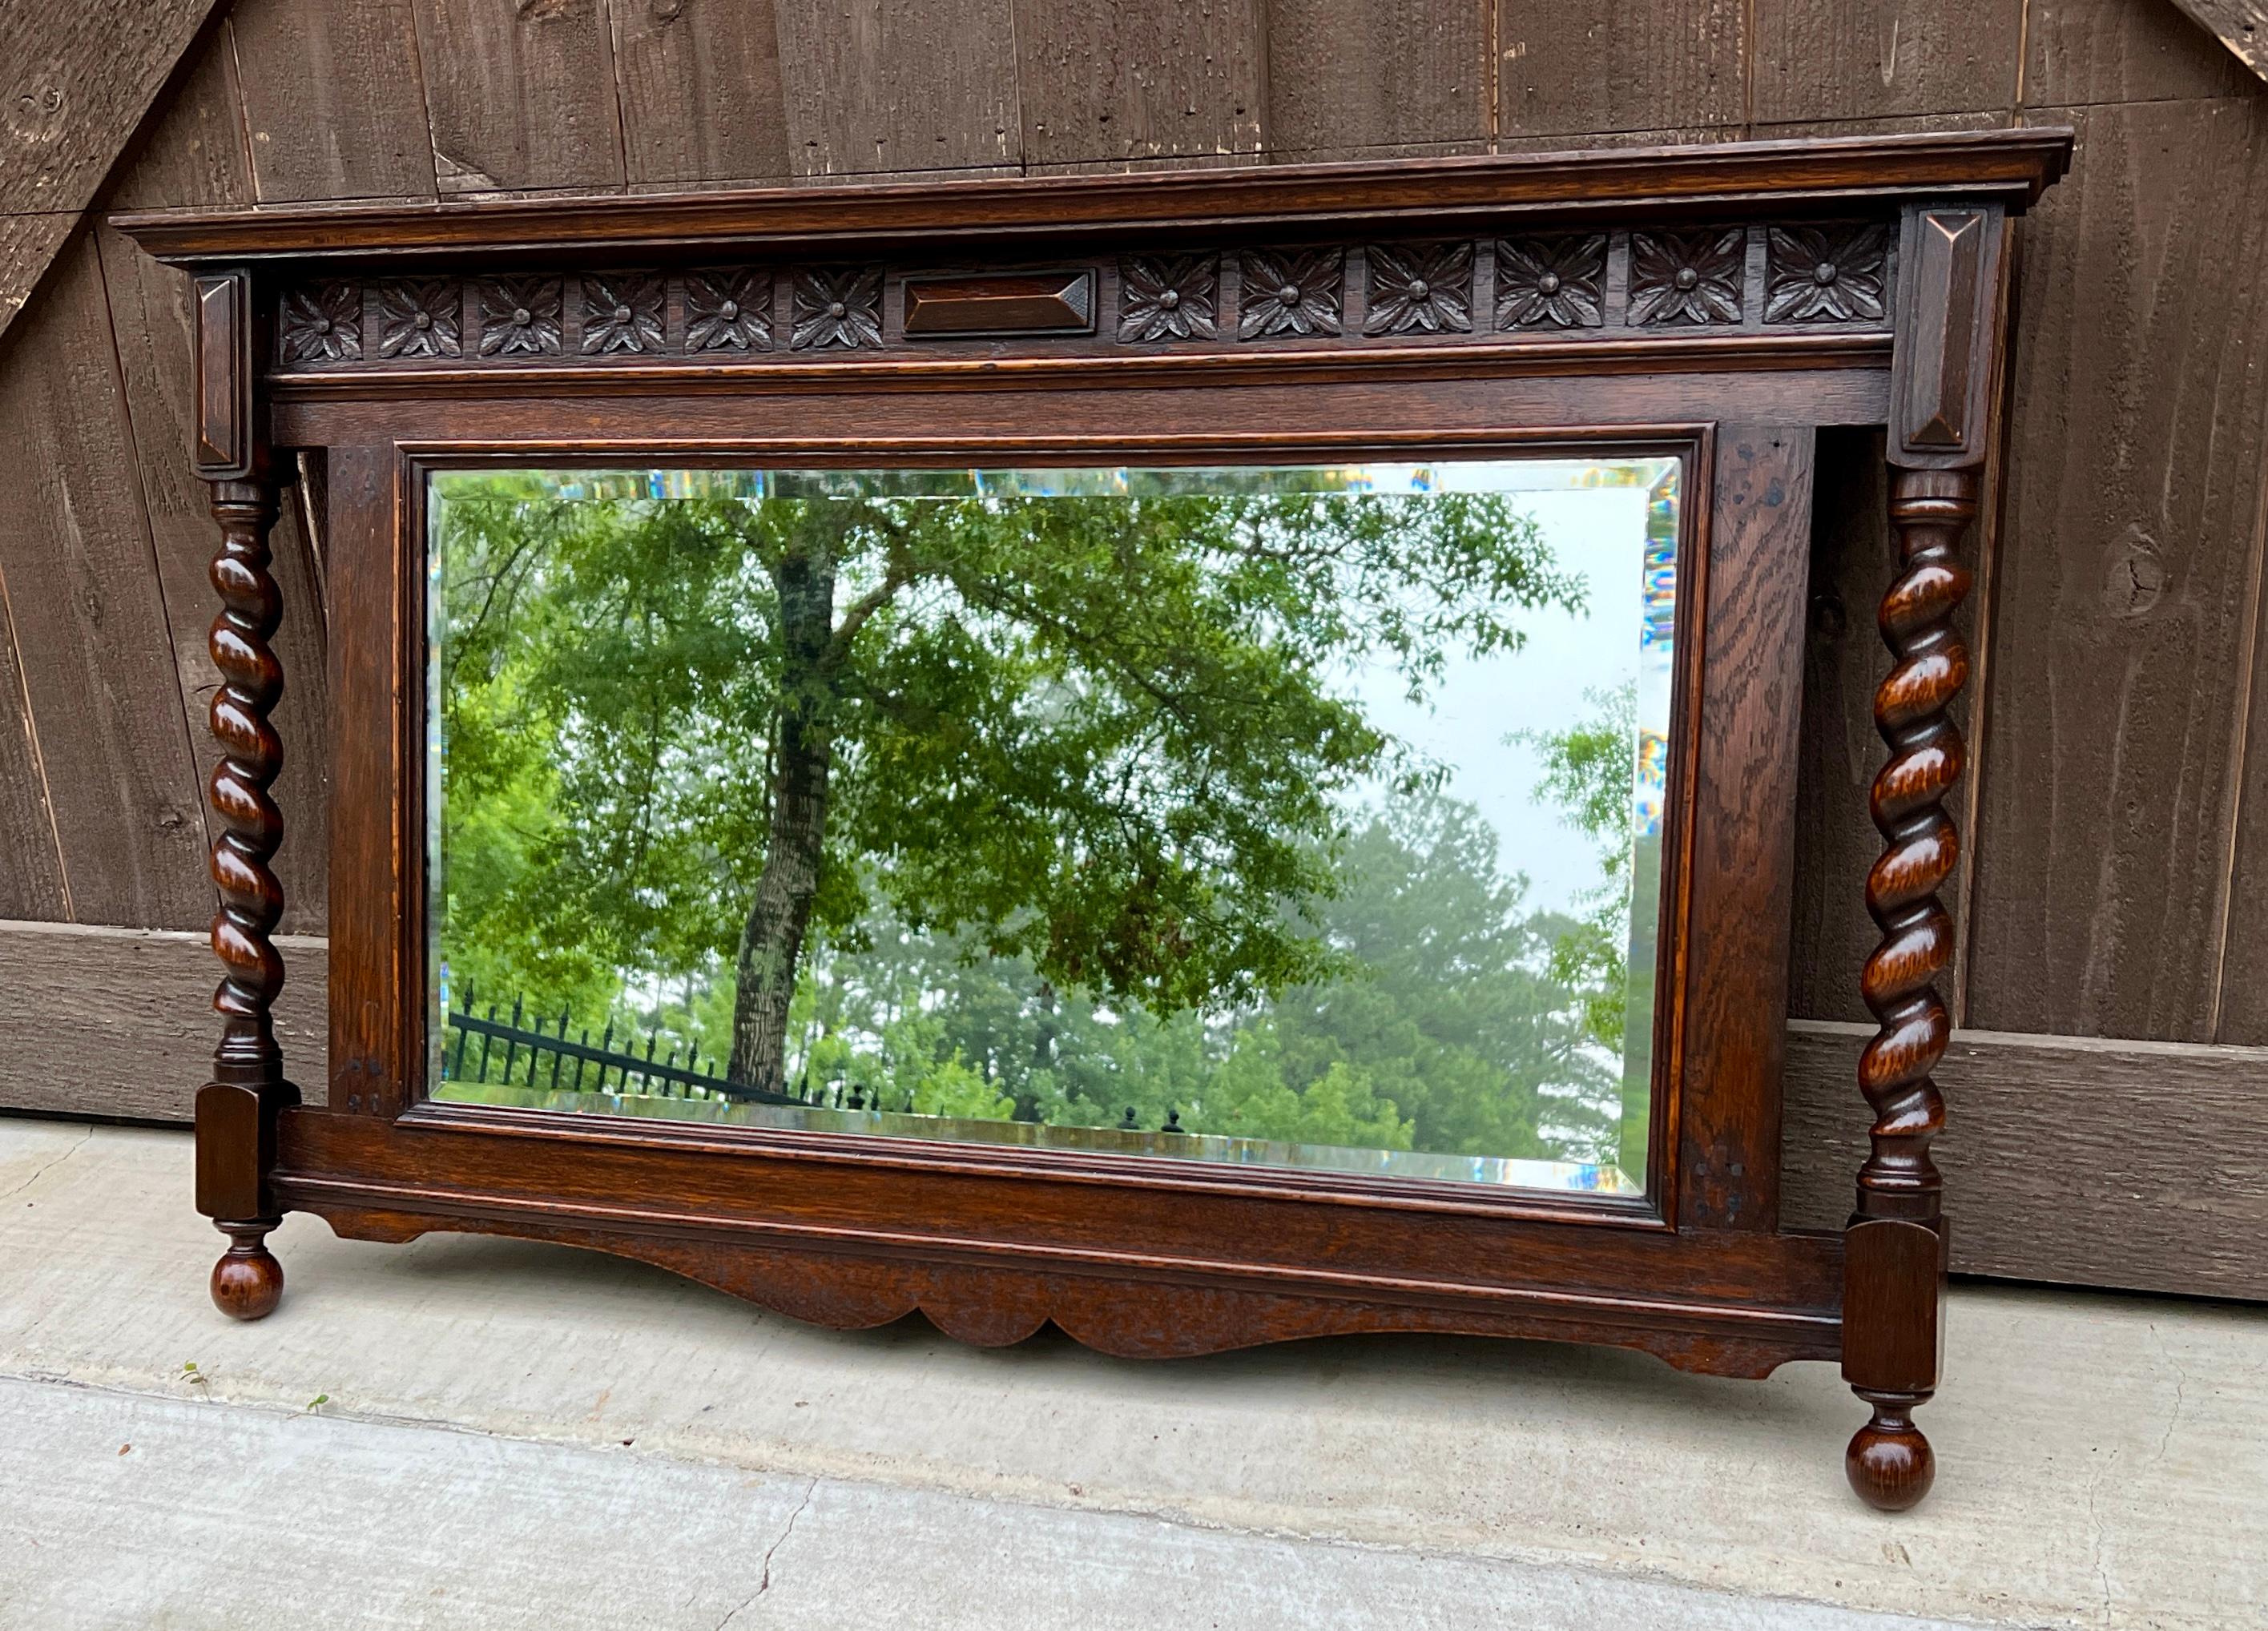 CHARMING Antique English Jacobean Style Rectangular Framed Oak Mirror w/Barley Twist Posts and Beveled Mirror~~c. 1930s
 
Popular classic English hanging wall mirror~~beautifully carved with wood back~~perfect for a fireplace mantel, entry hall,